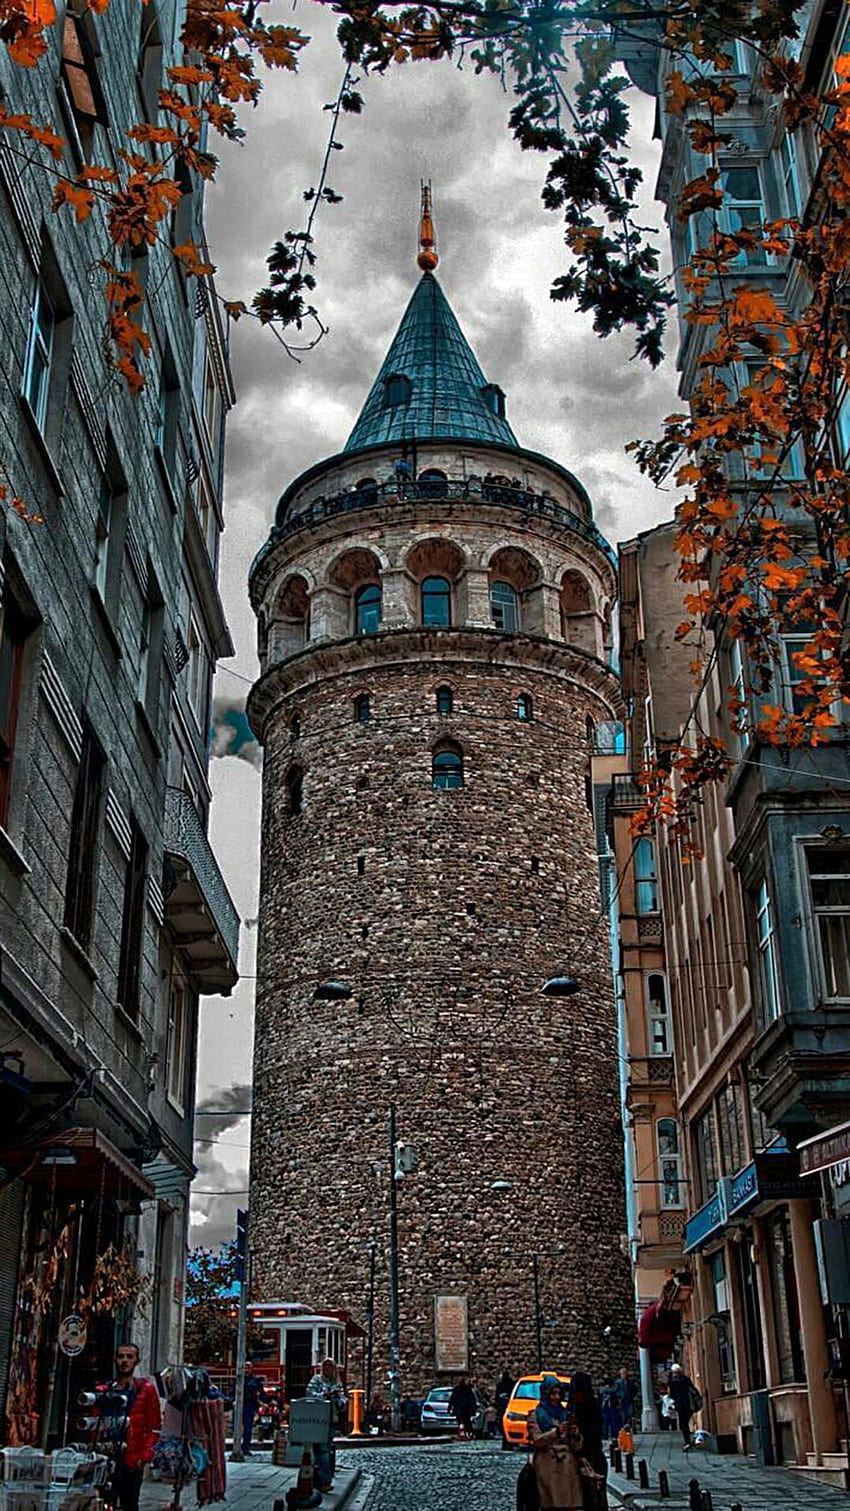 A fantastic shot of Galata Tower which would be a great HD phone wallpaper